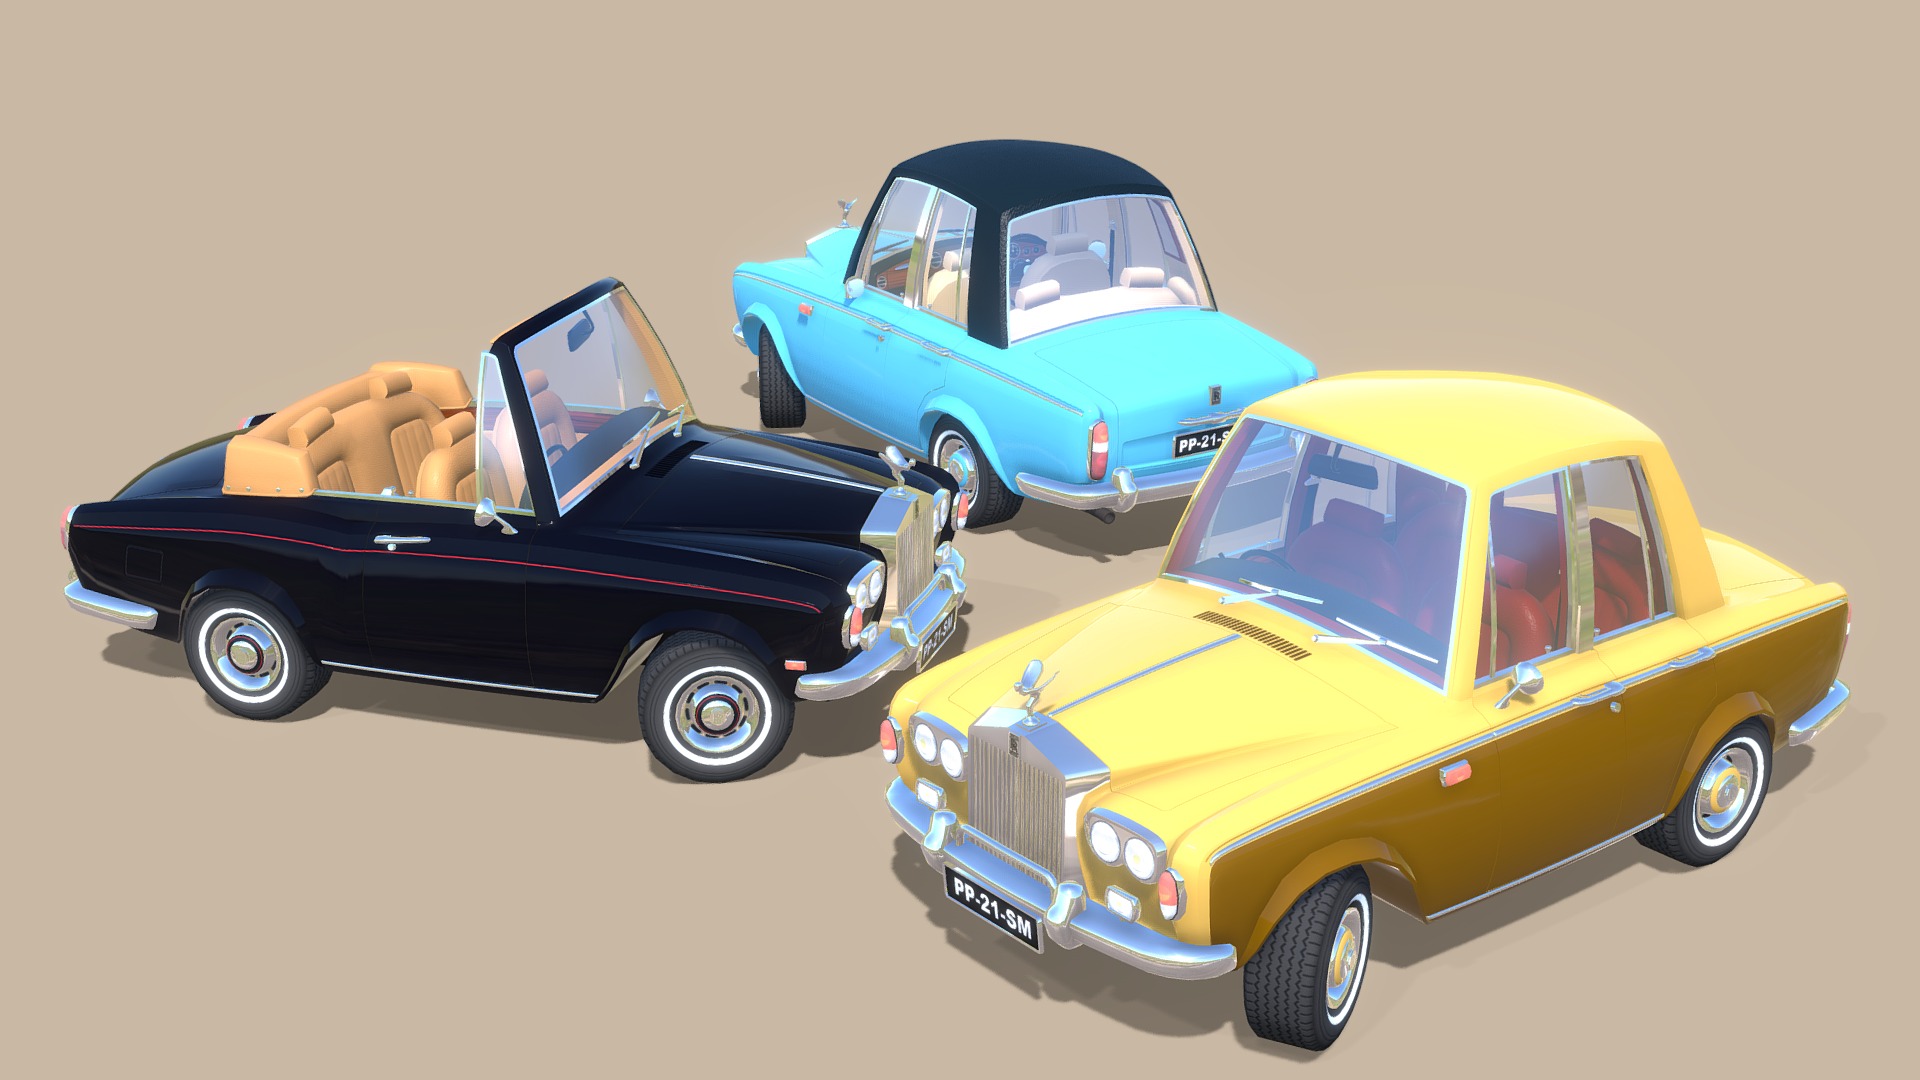 3D model Rolls Royce Silver Shadow/Corniche cartoon style - This is a 3D model of the Rolls Royce Silver Shadow/Corniche cartoon style. The 3D model is about a group of cars.